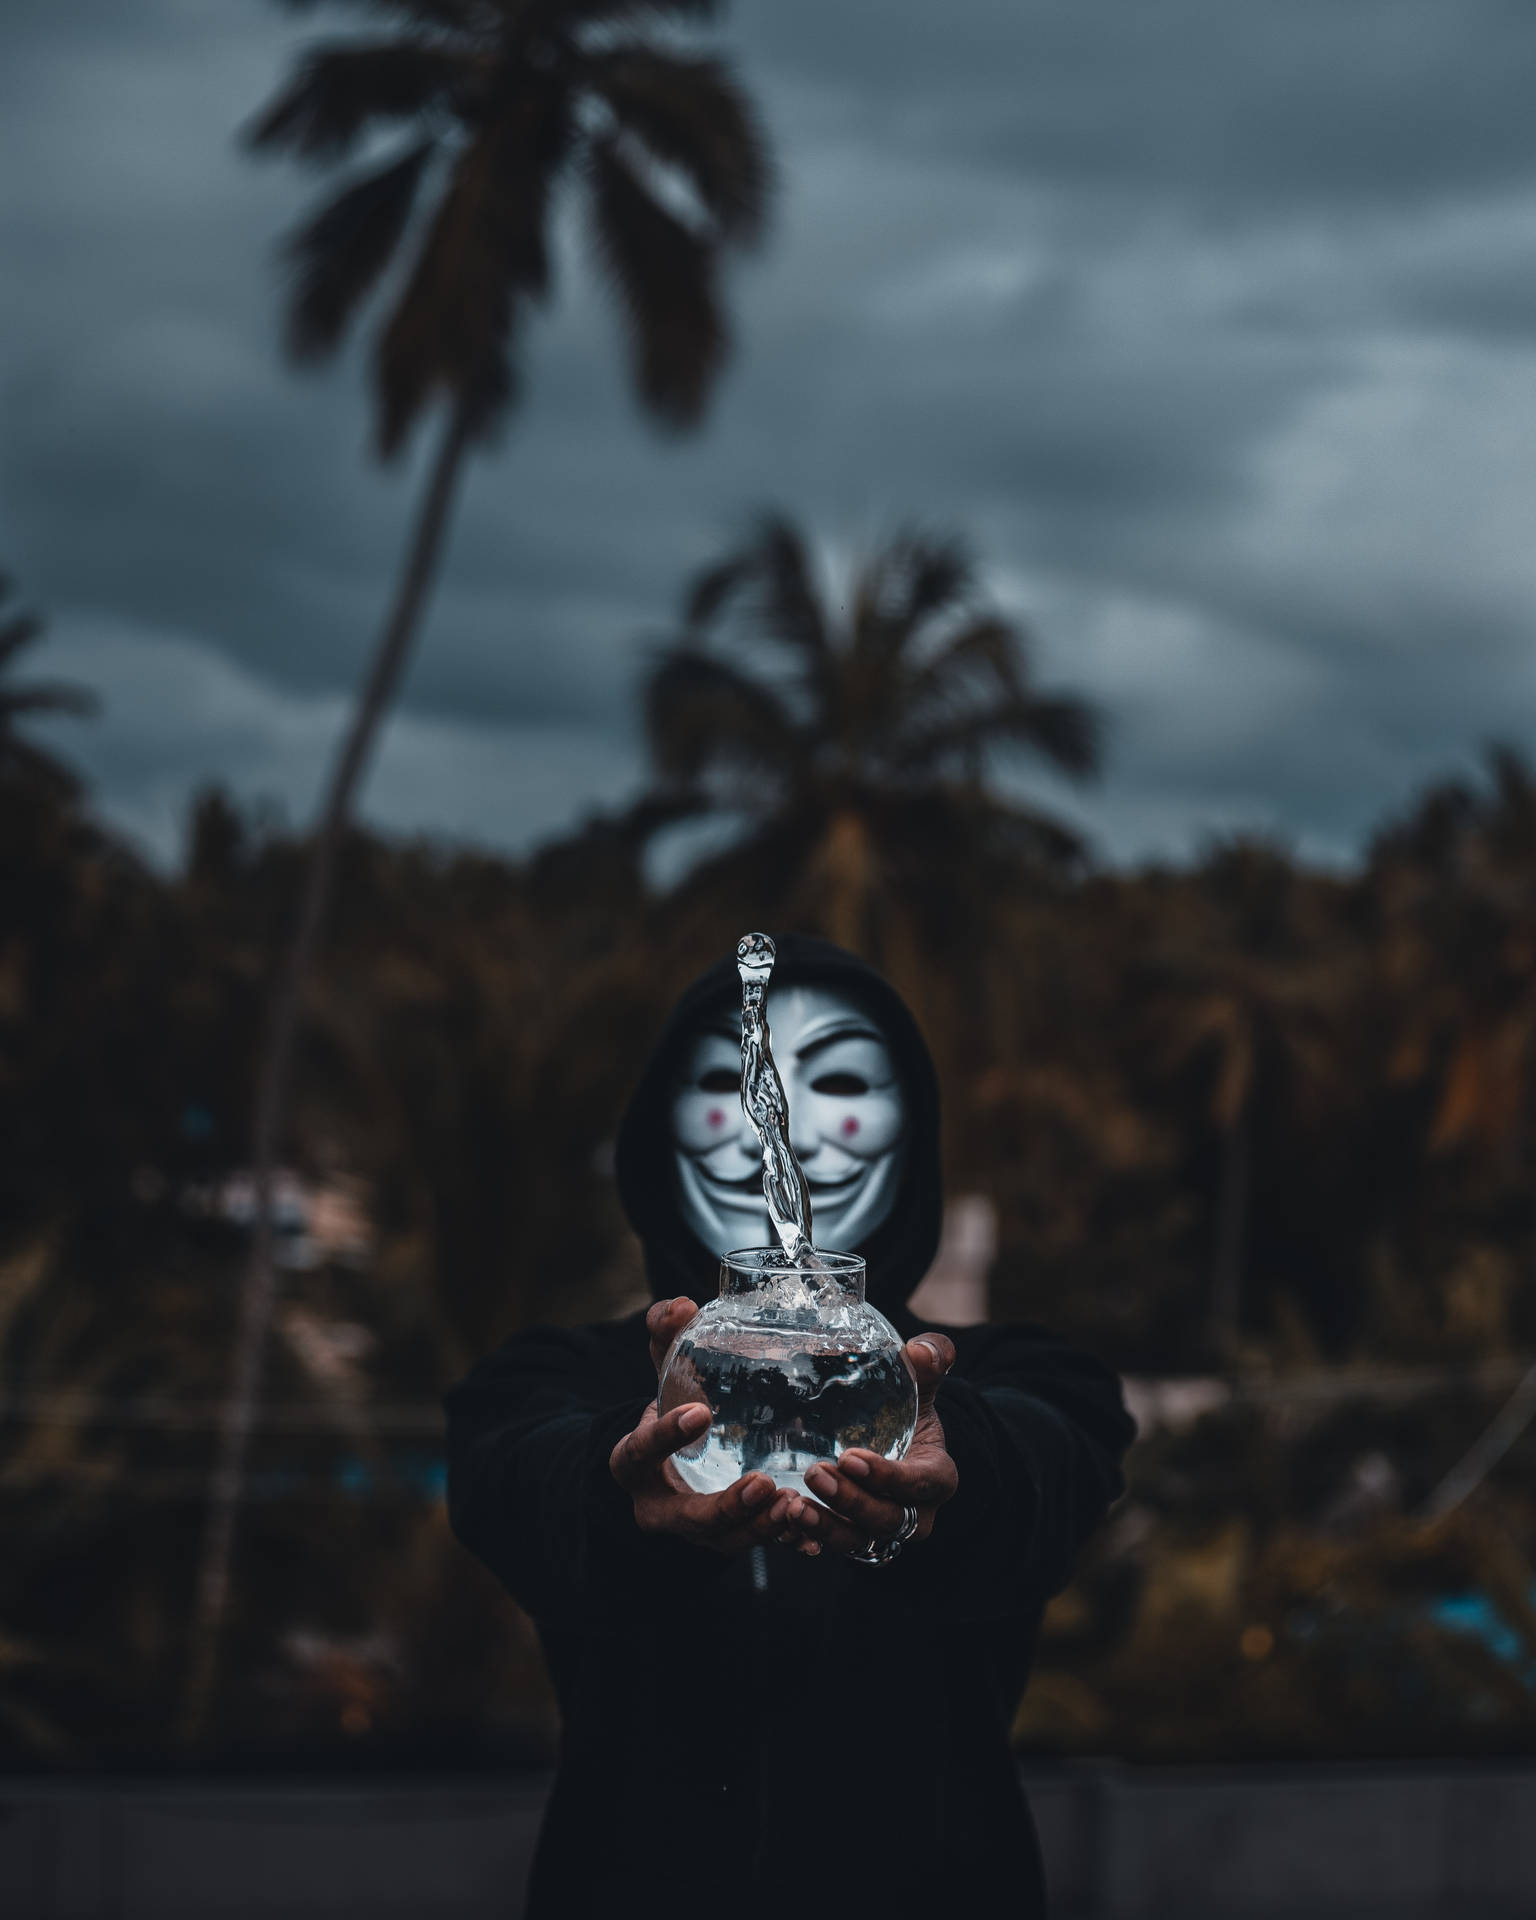 Striking Mask And Hands Of Anonymous Wallpaper